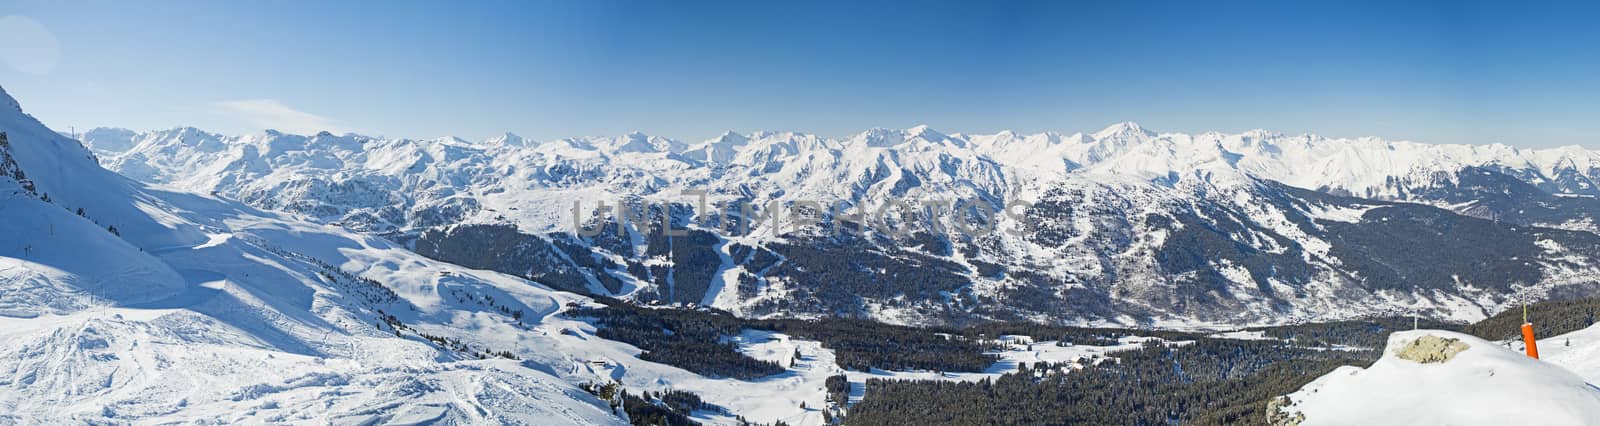 Panoramic view across snow covered alpine mountain range in alps on blue sky background